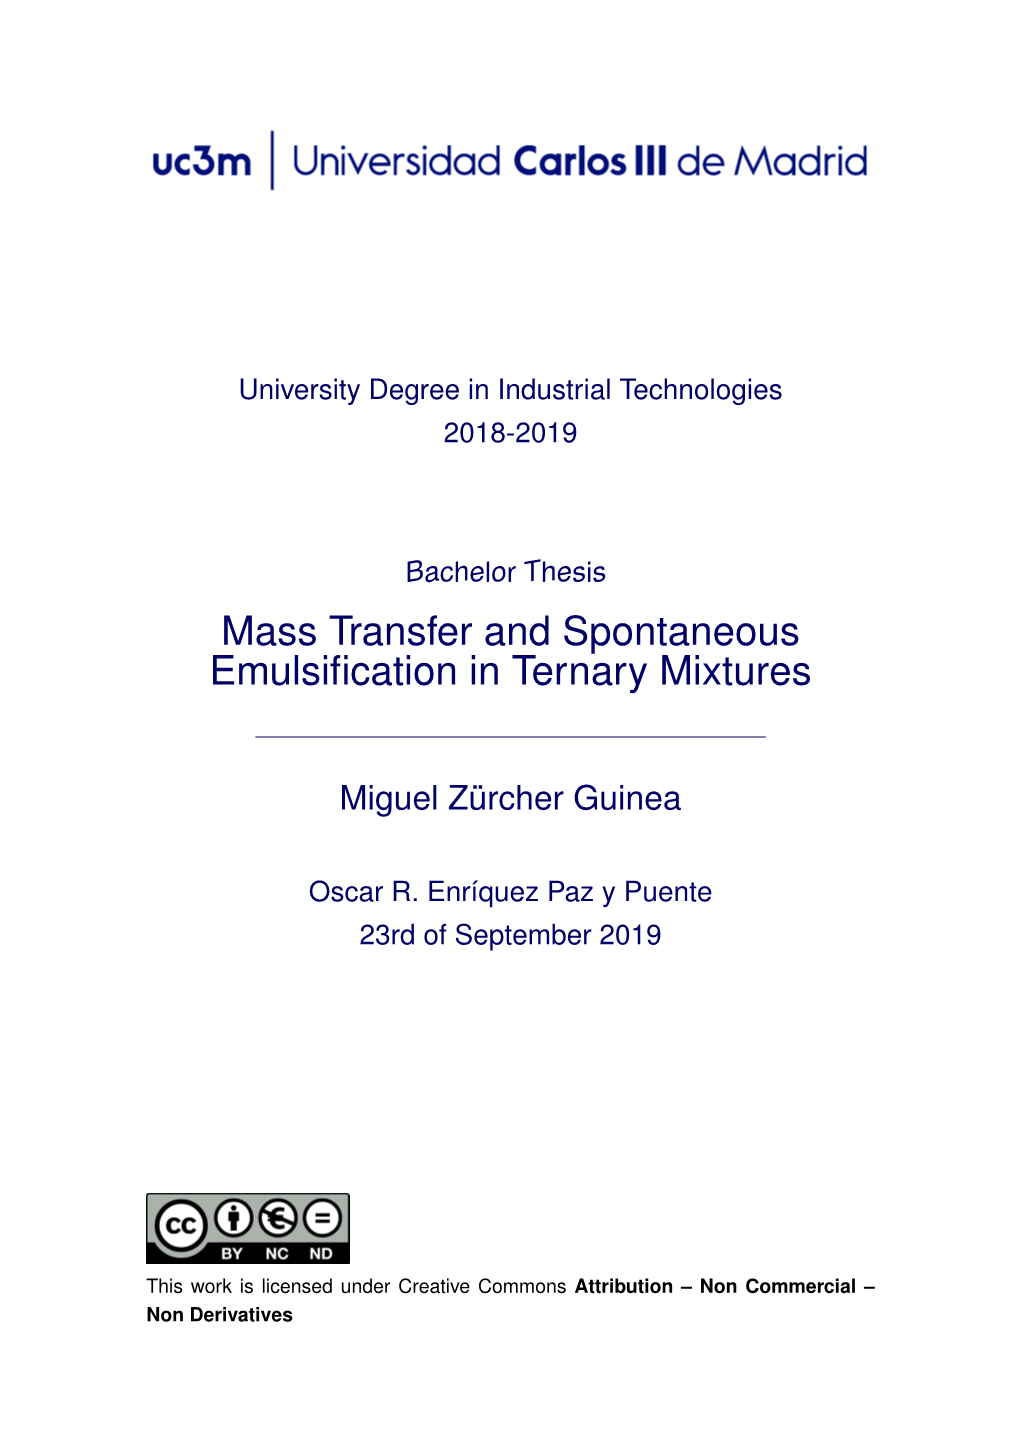 Mass Transfer and Spontaneous Emulsification in Ternary Mixtures